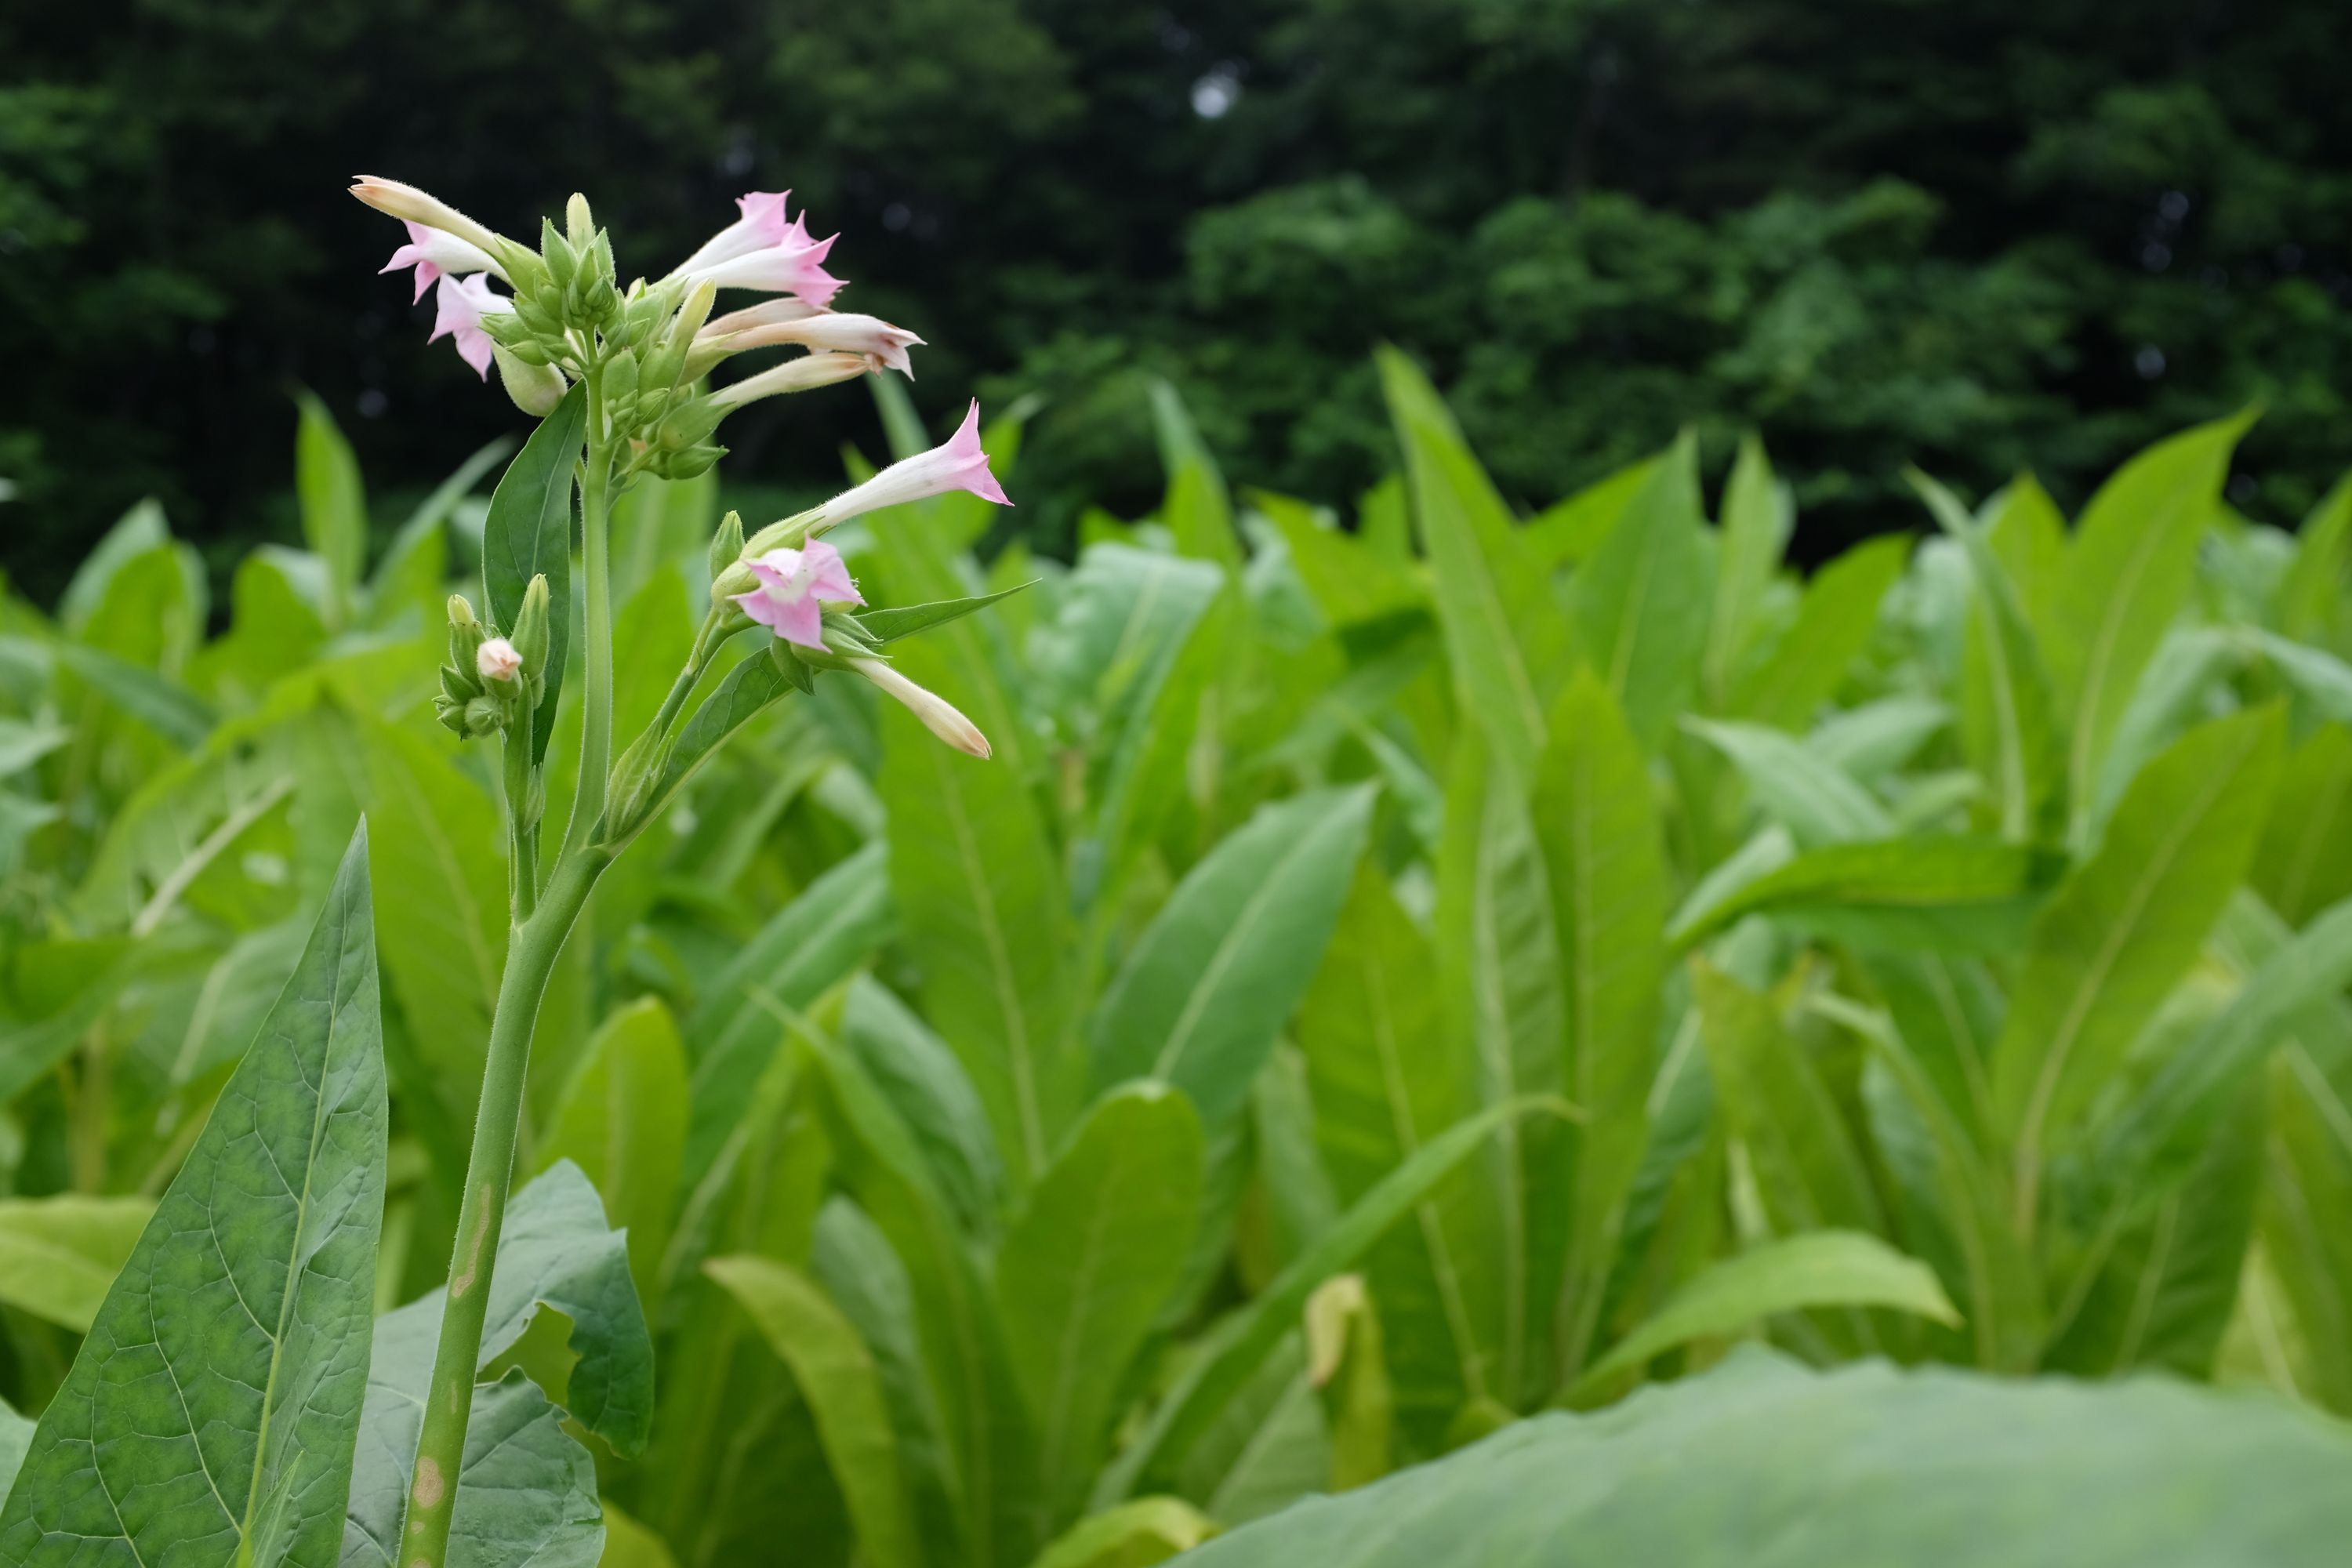 Closeup of a tobacco field, with one plant in pink bloom.